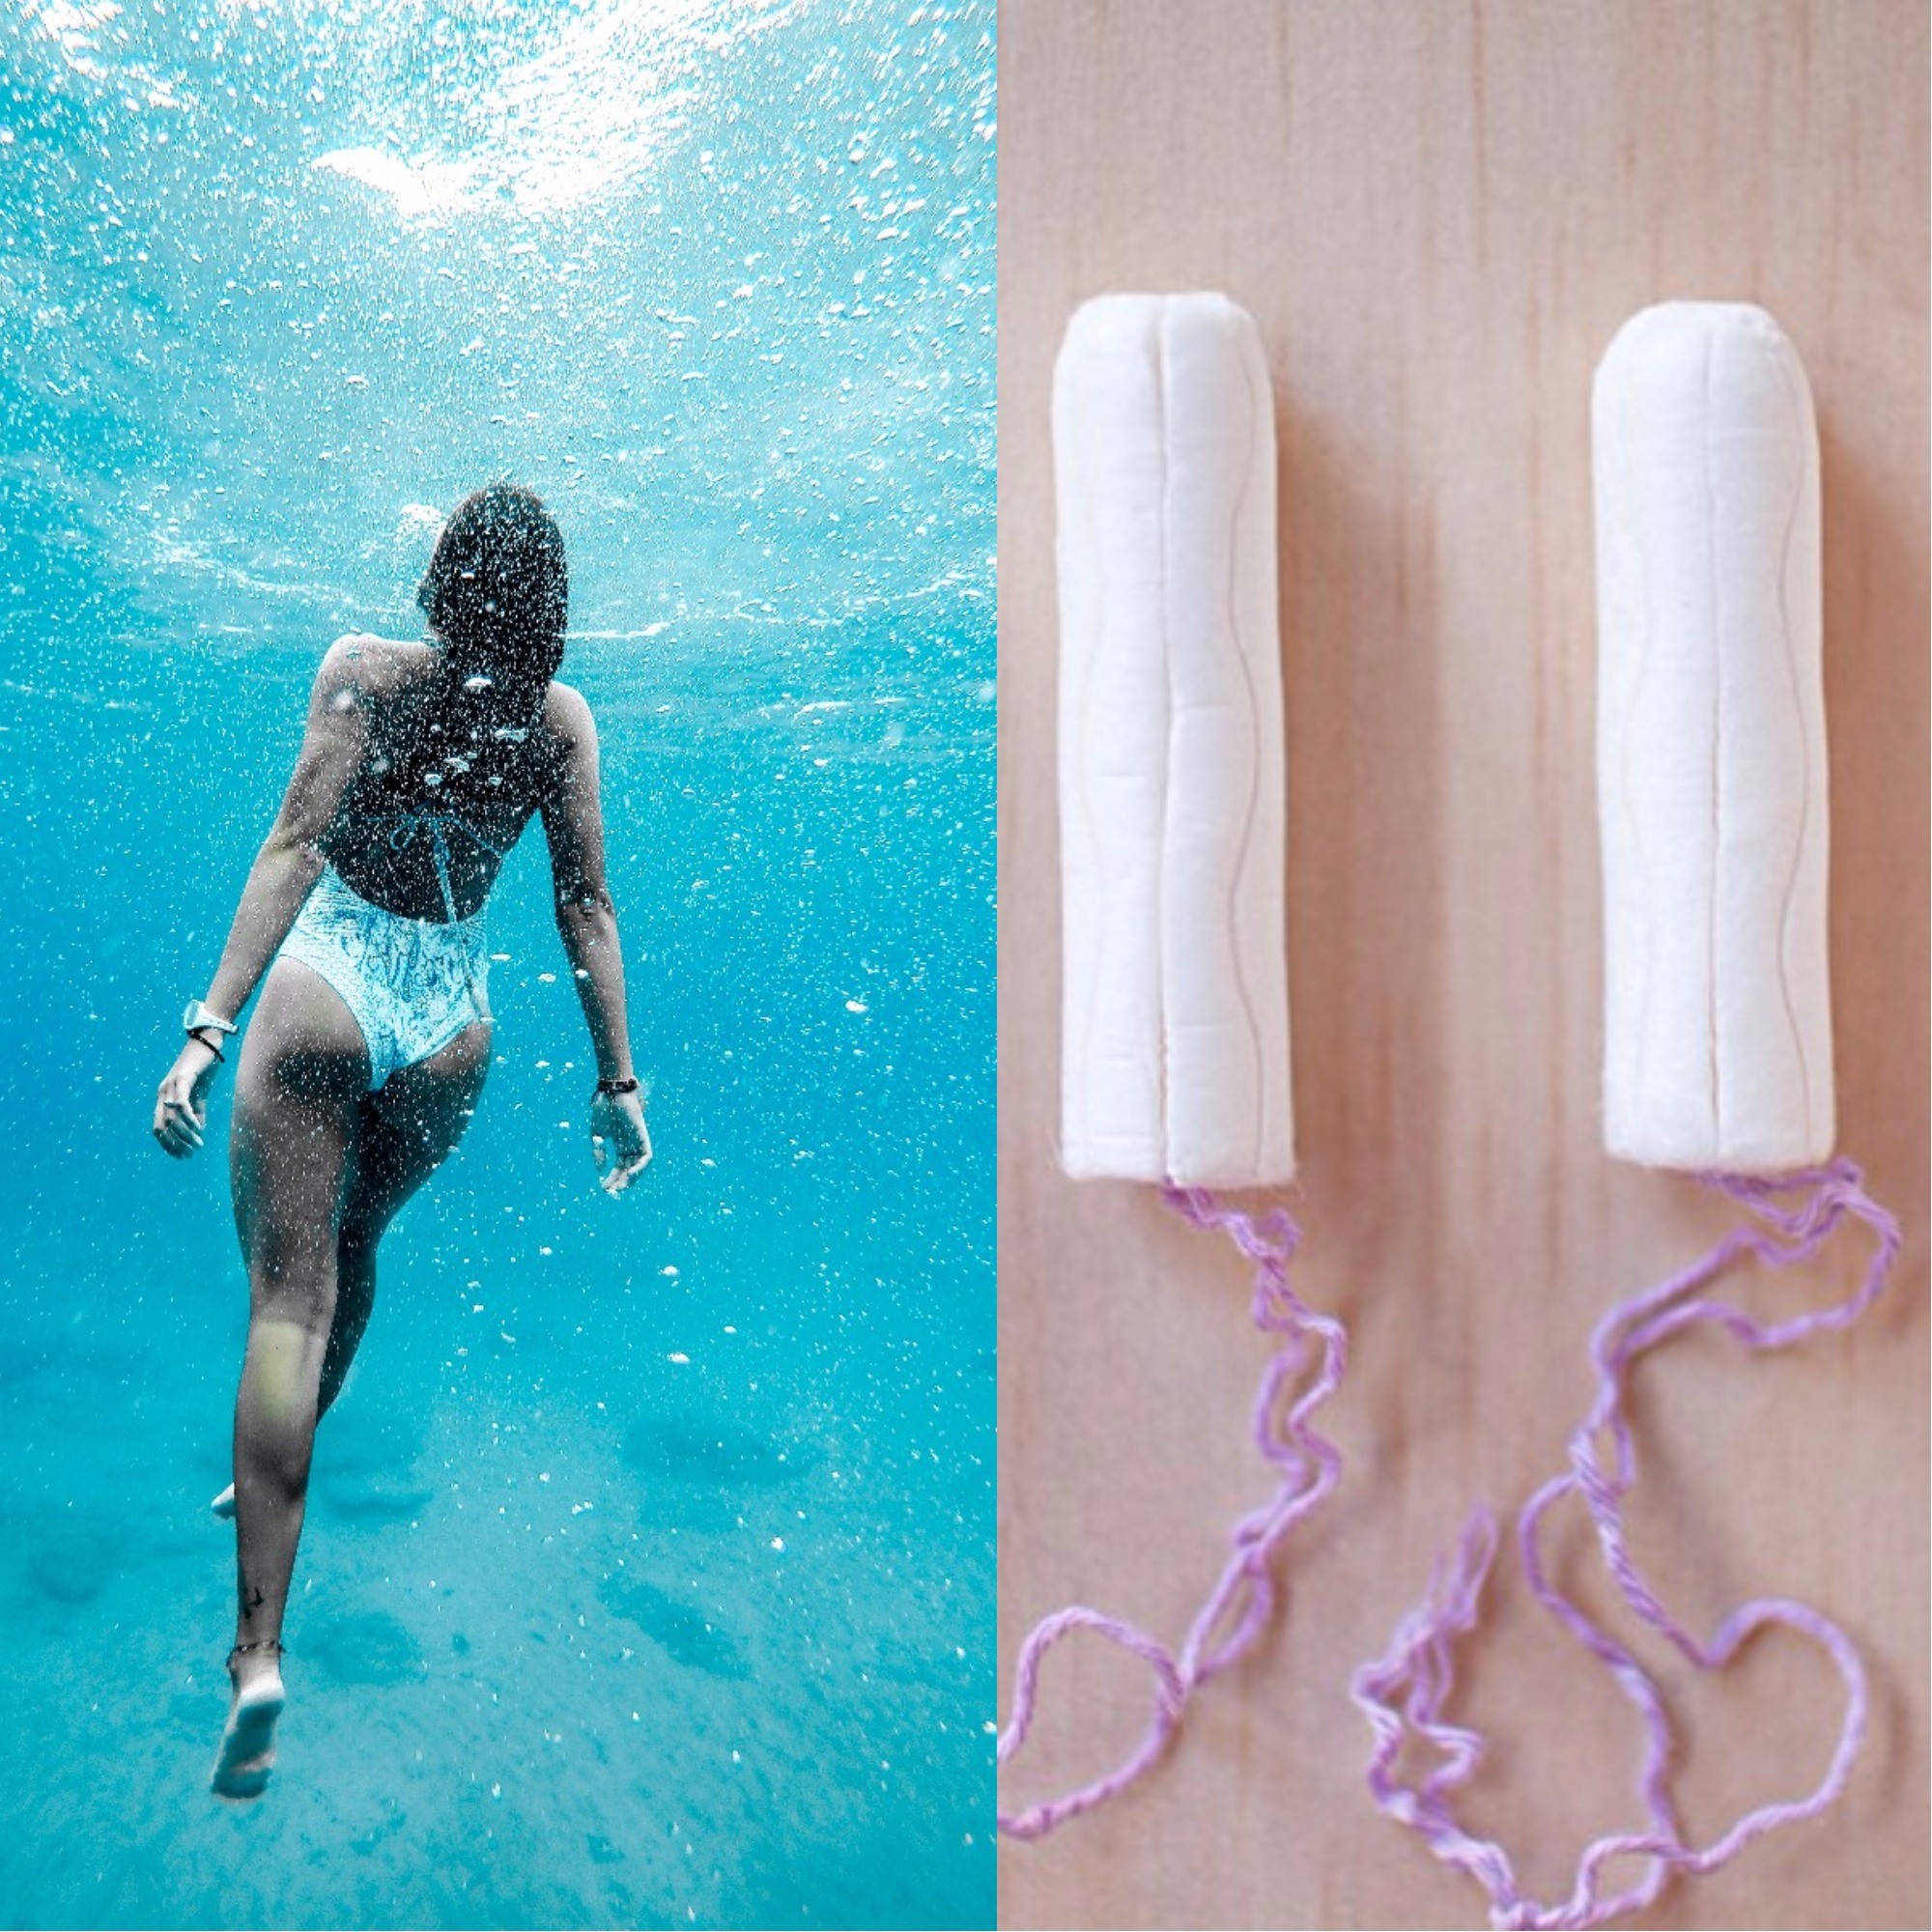 Talisi - Swimming during your period isn't a problem. However, you